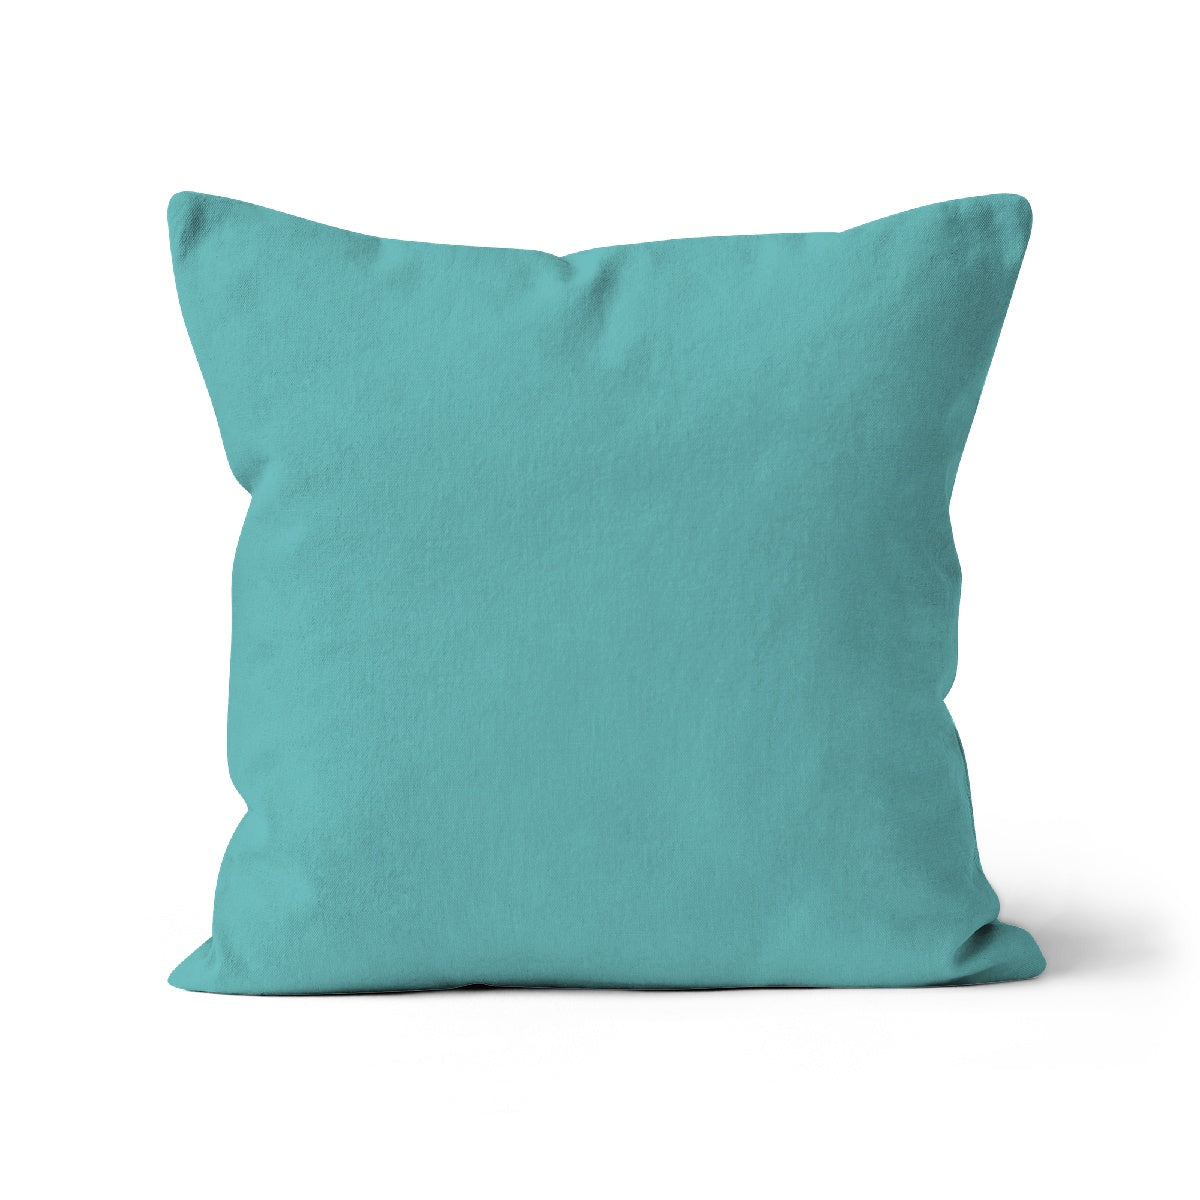 Tiffany blue cushion cover square shape, Made in UK, sustainable, eco-friendly inks. Free delivery. High quality, washable cover.